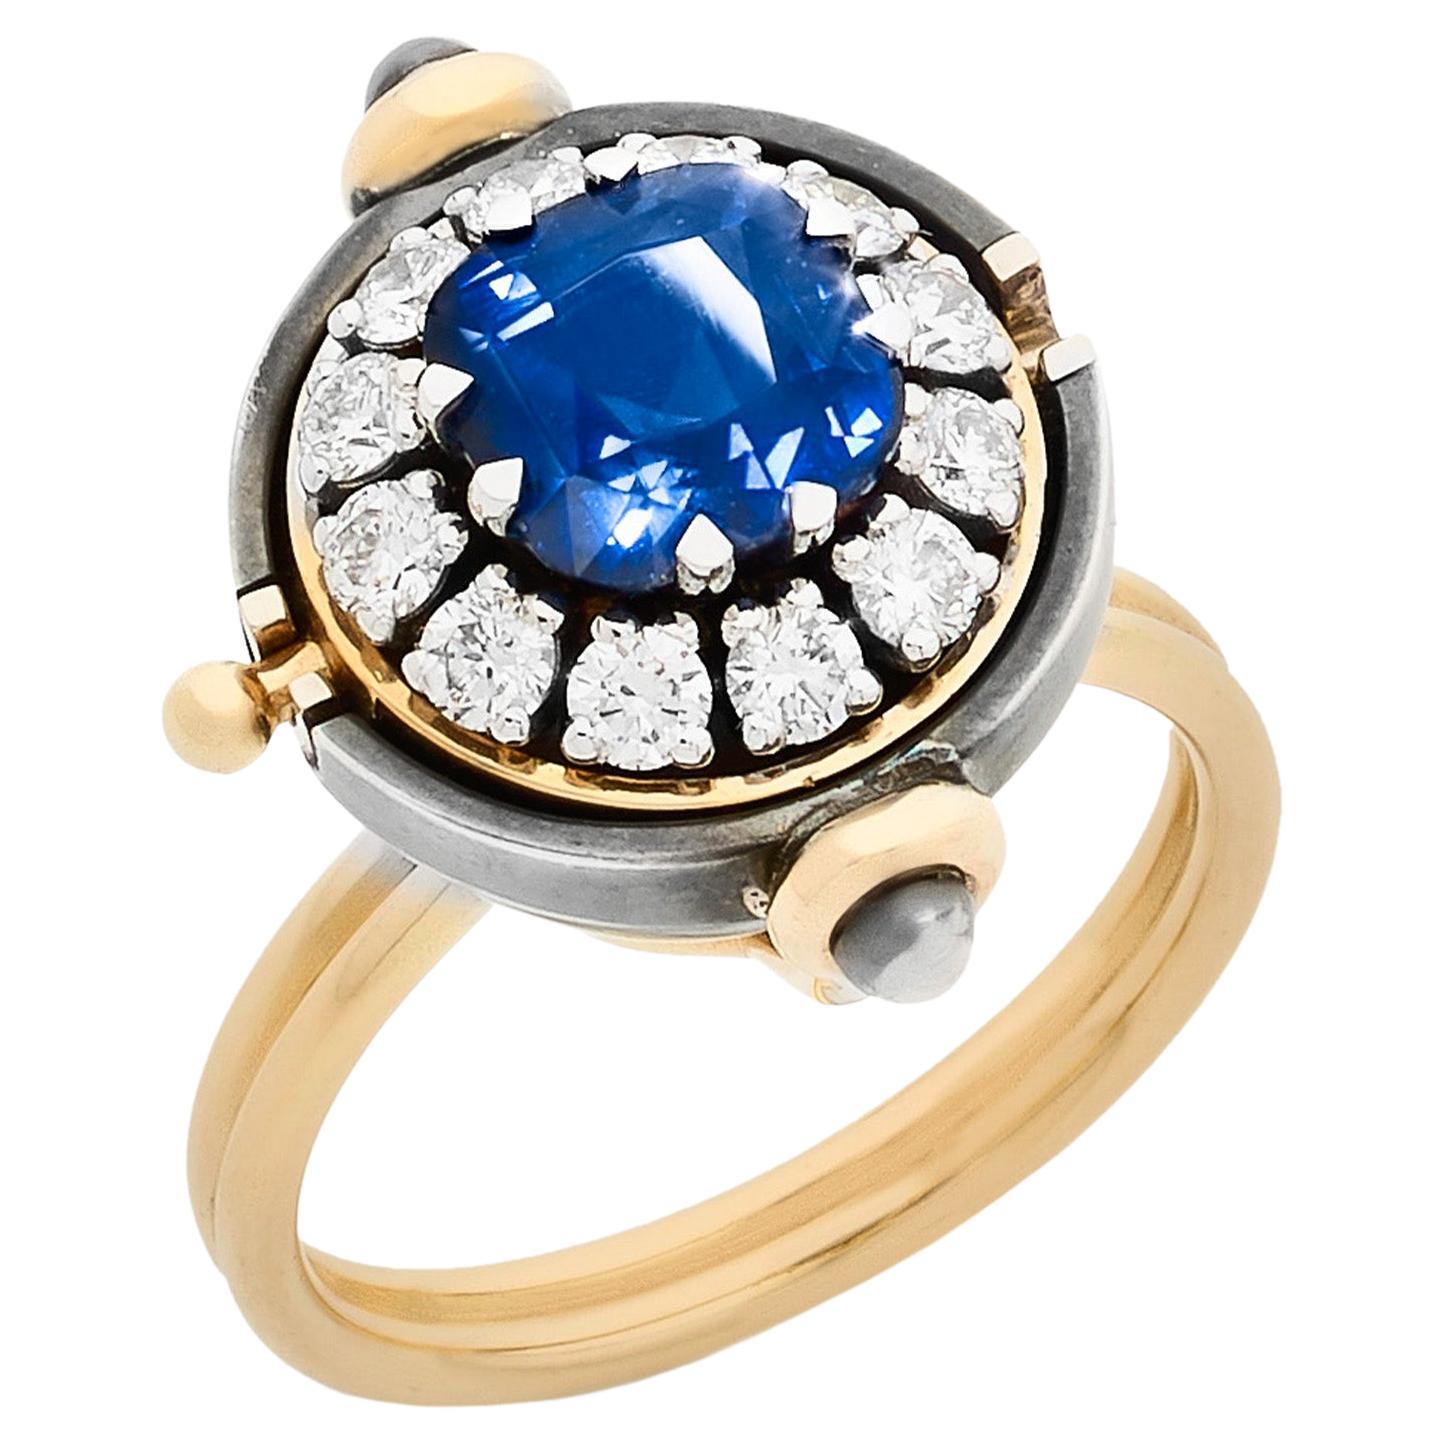 Medium Sapphire & Diamonds Sphere Ring in 18k Yellow Gold by Elie Top